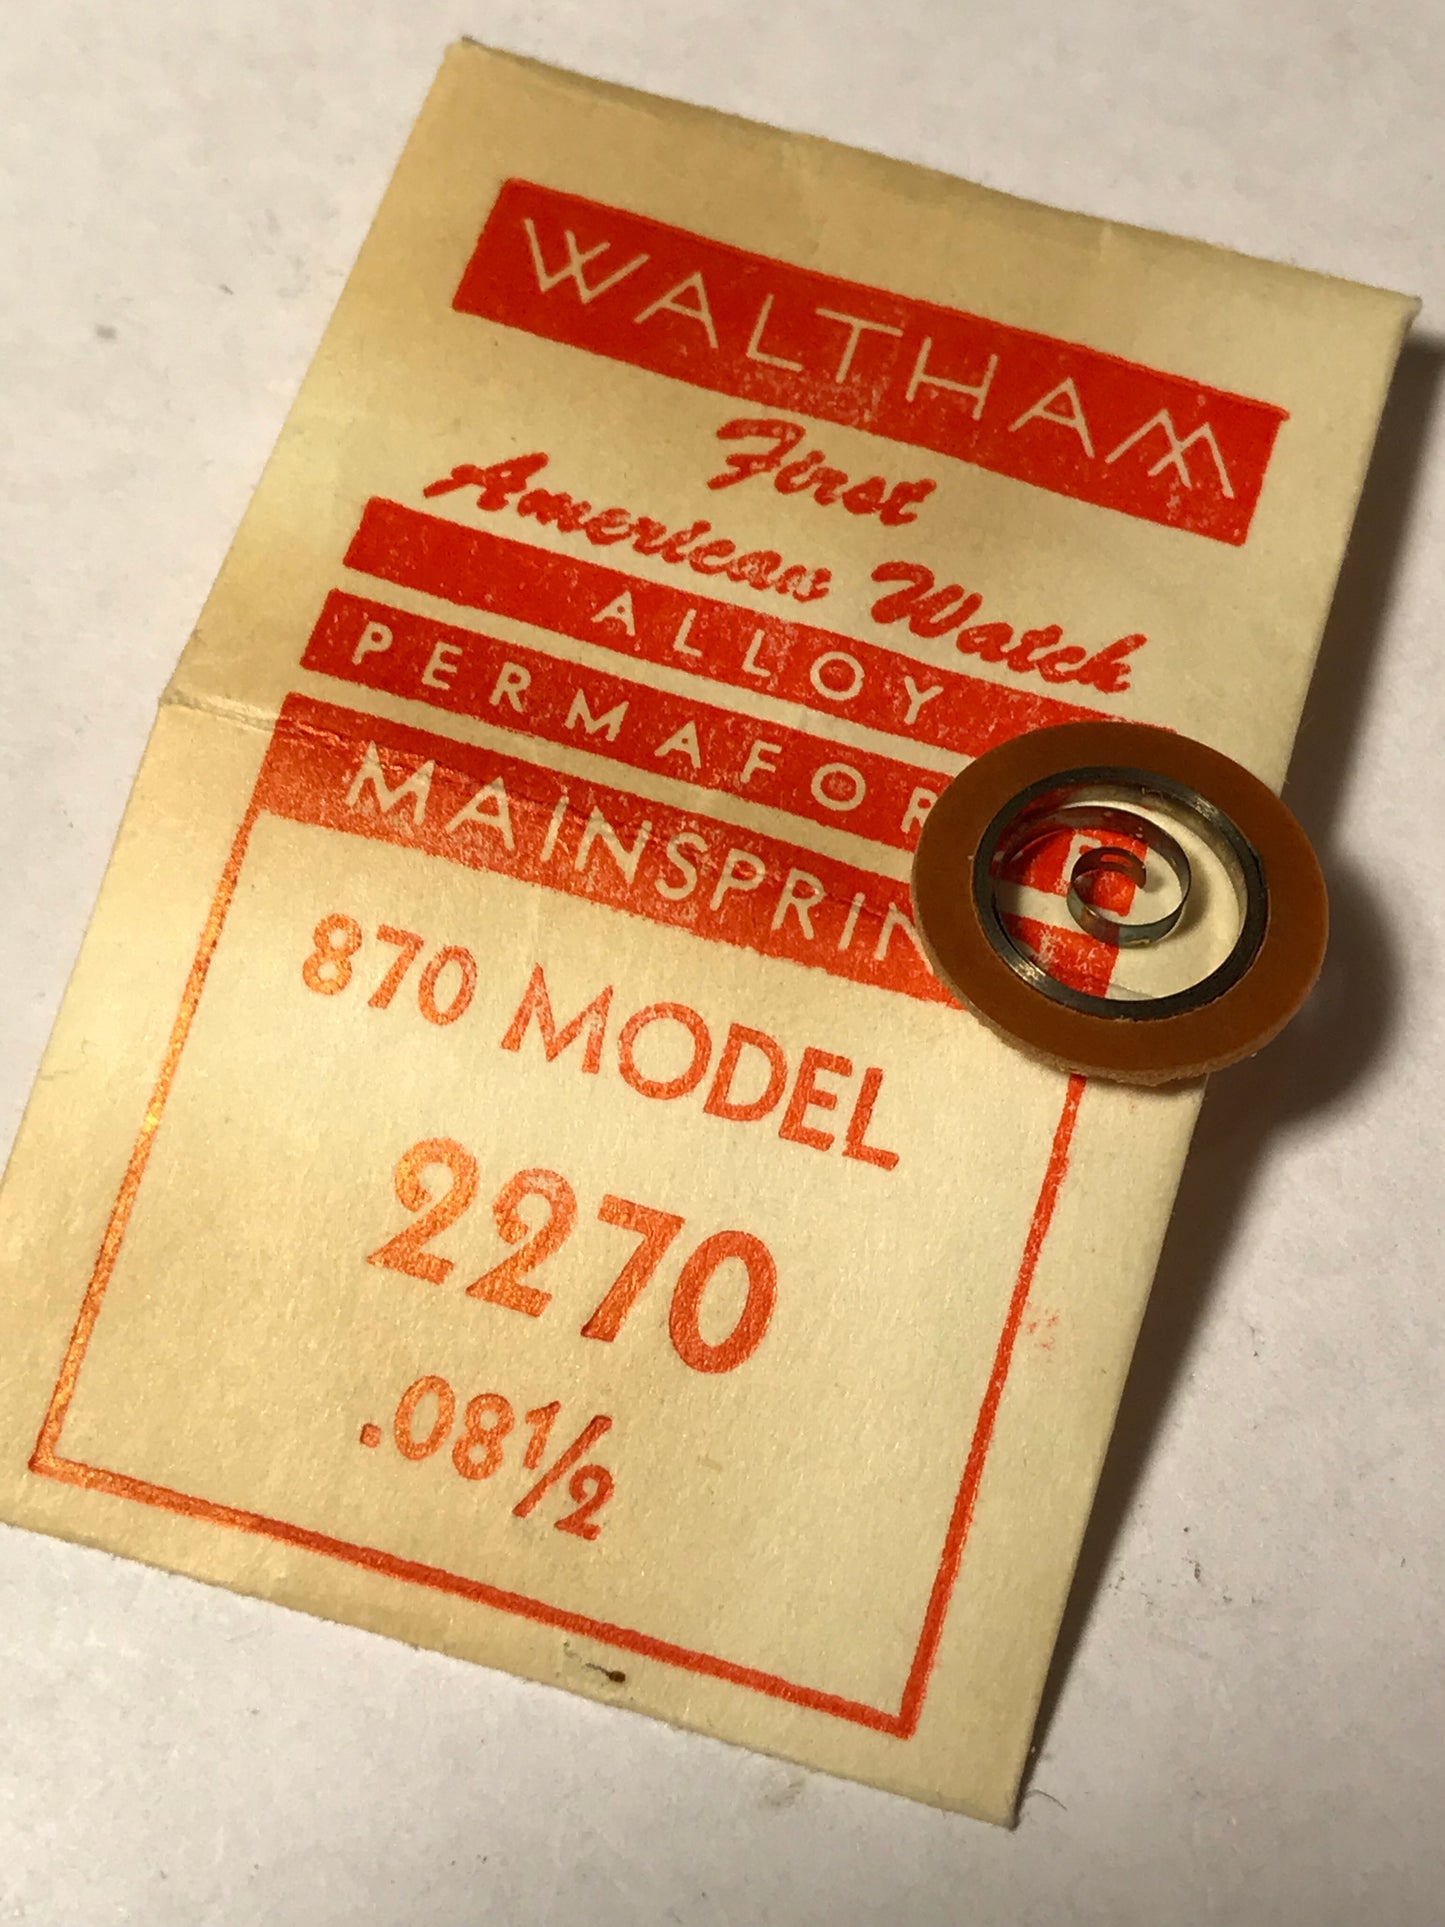 Waltham Factory Mainspring for Model 870 - 875 Movements No. 2270 / 2242- Alloy